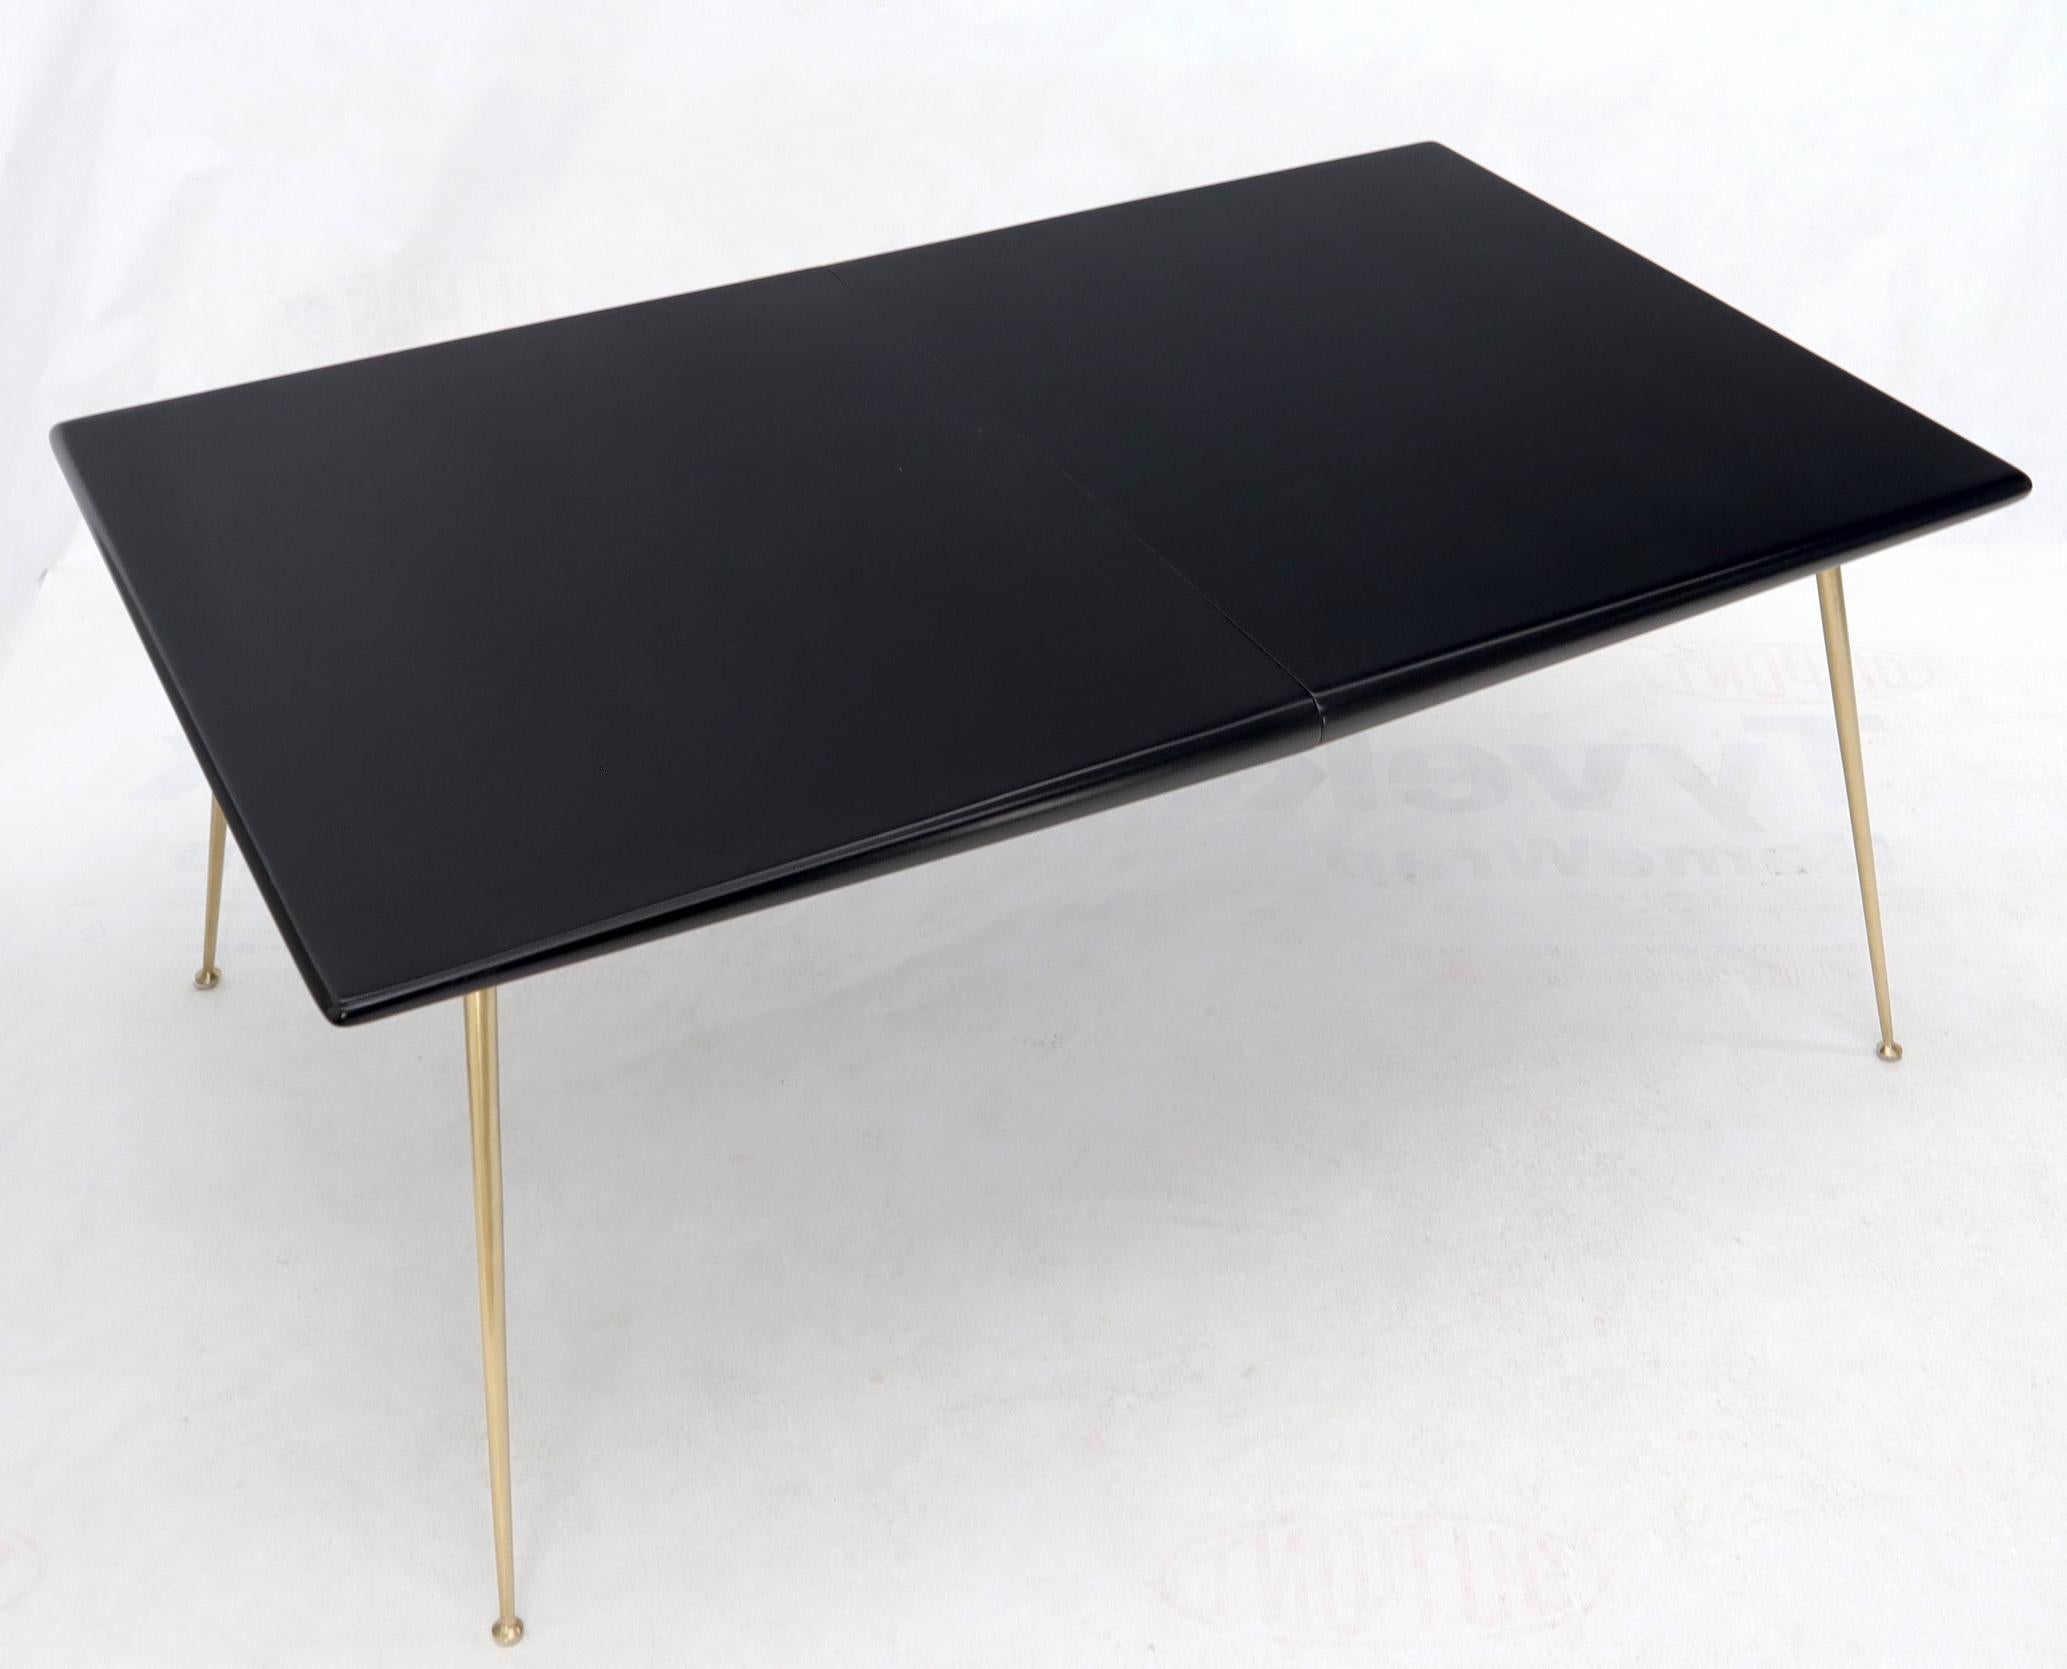 Black Lacquer Brass Legs Gibbings Dining Table with 1 Extensions Board In Excellent Condition For Sale In Rockaway, NJ